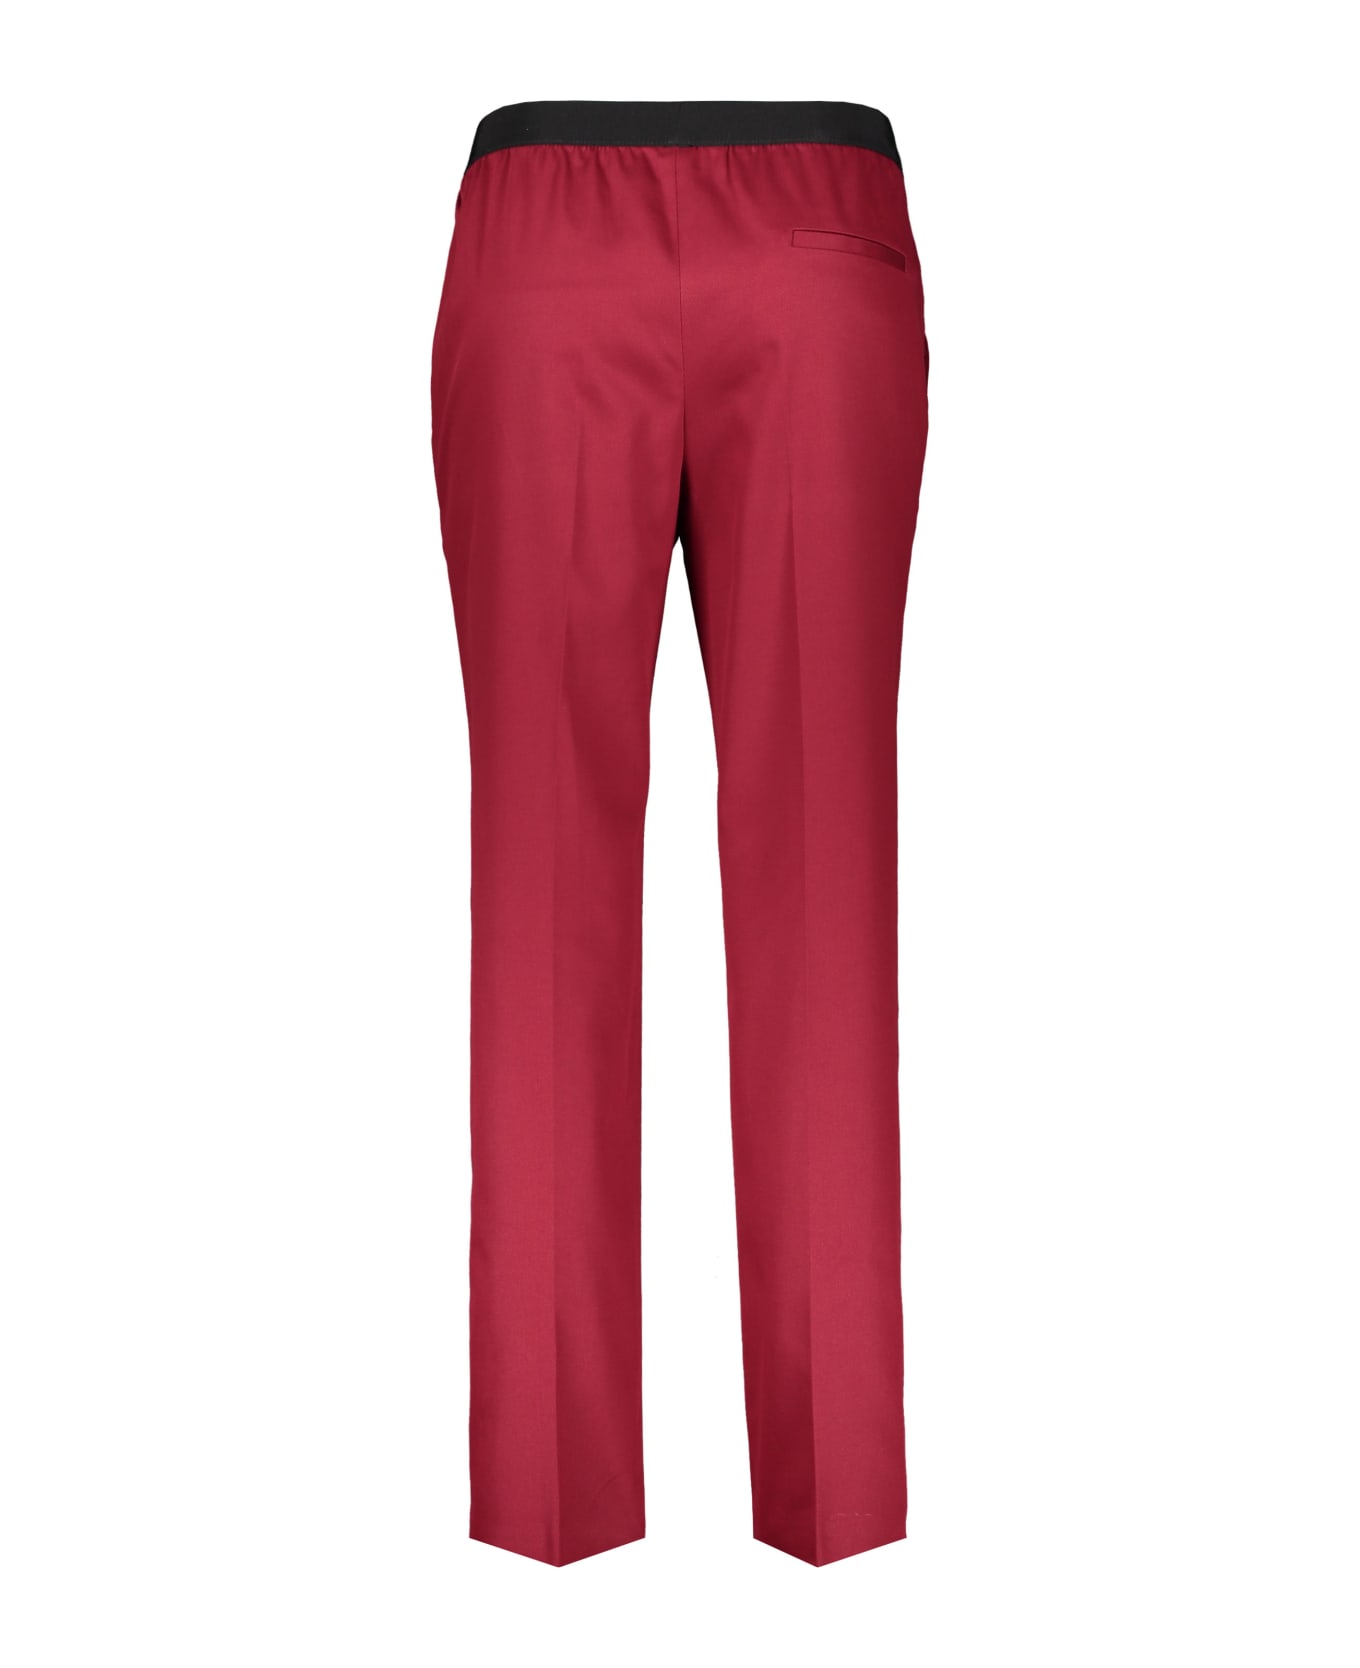 Agnona Cotton Trousers - red ボトムス